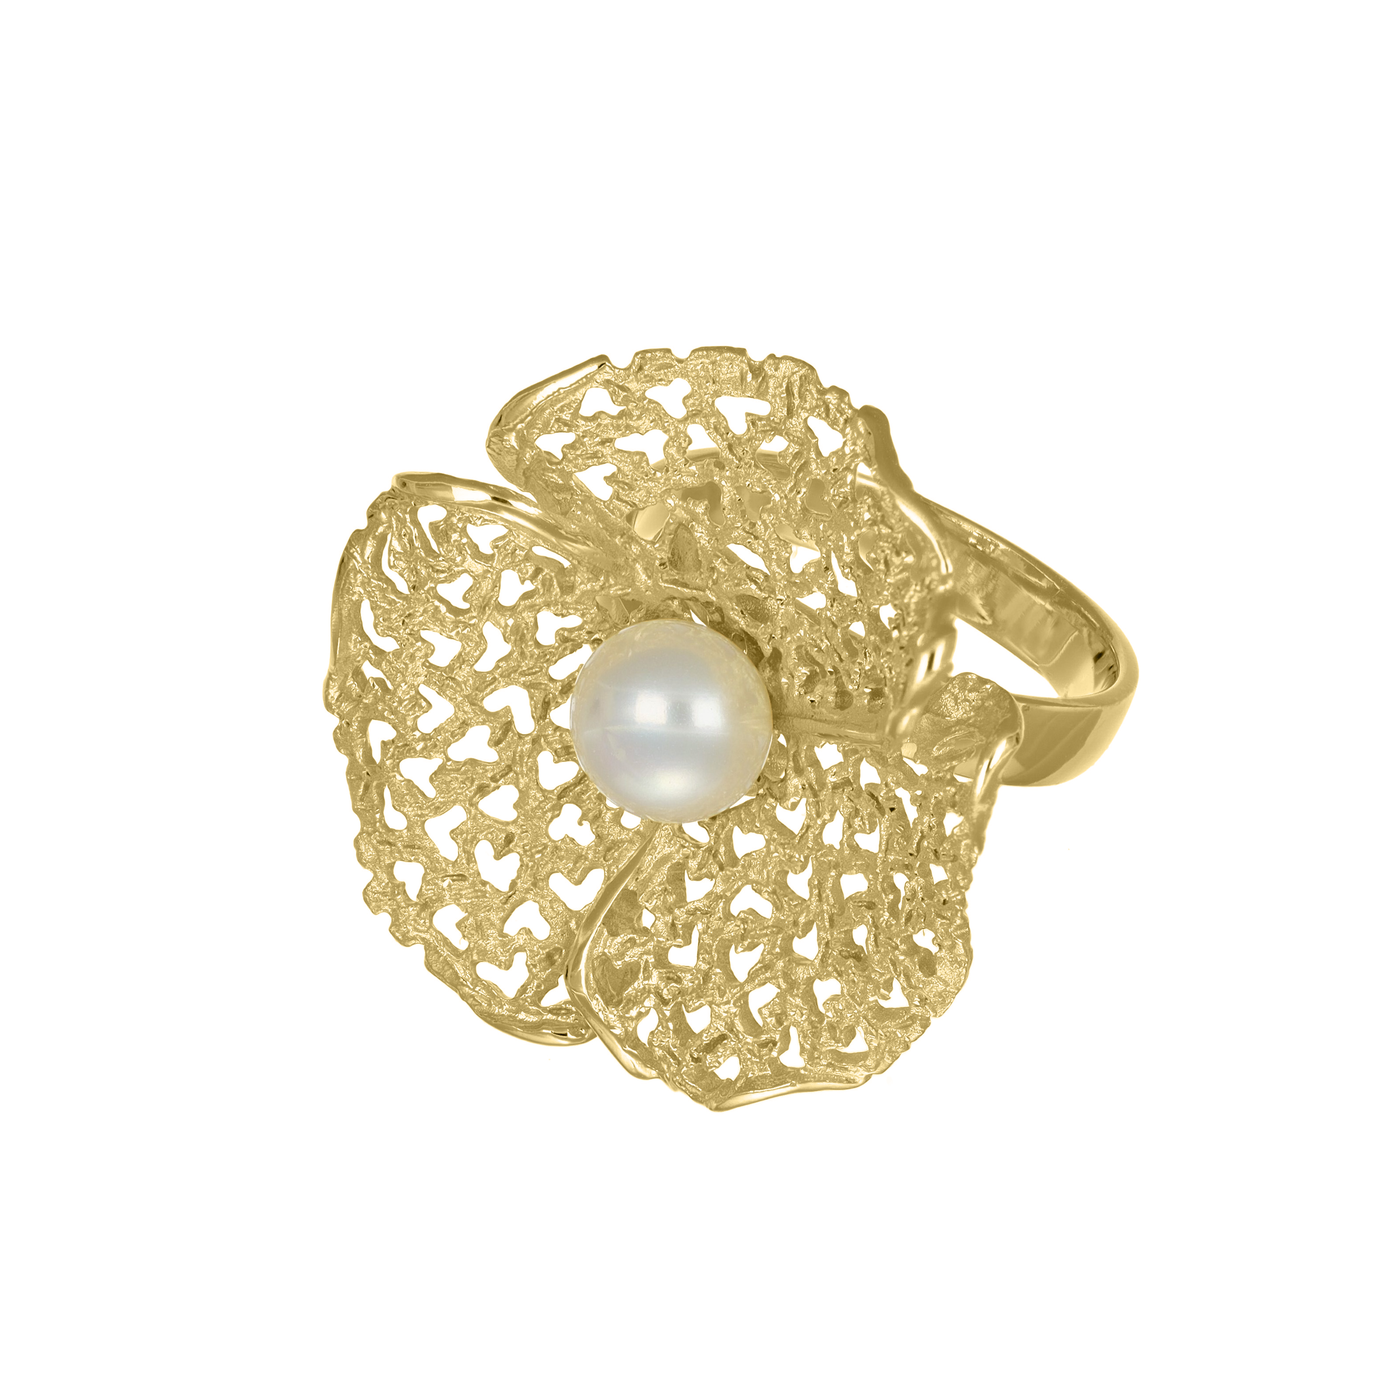 IL Diletto - Silver Flower Stardust Ring, Gold Plated